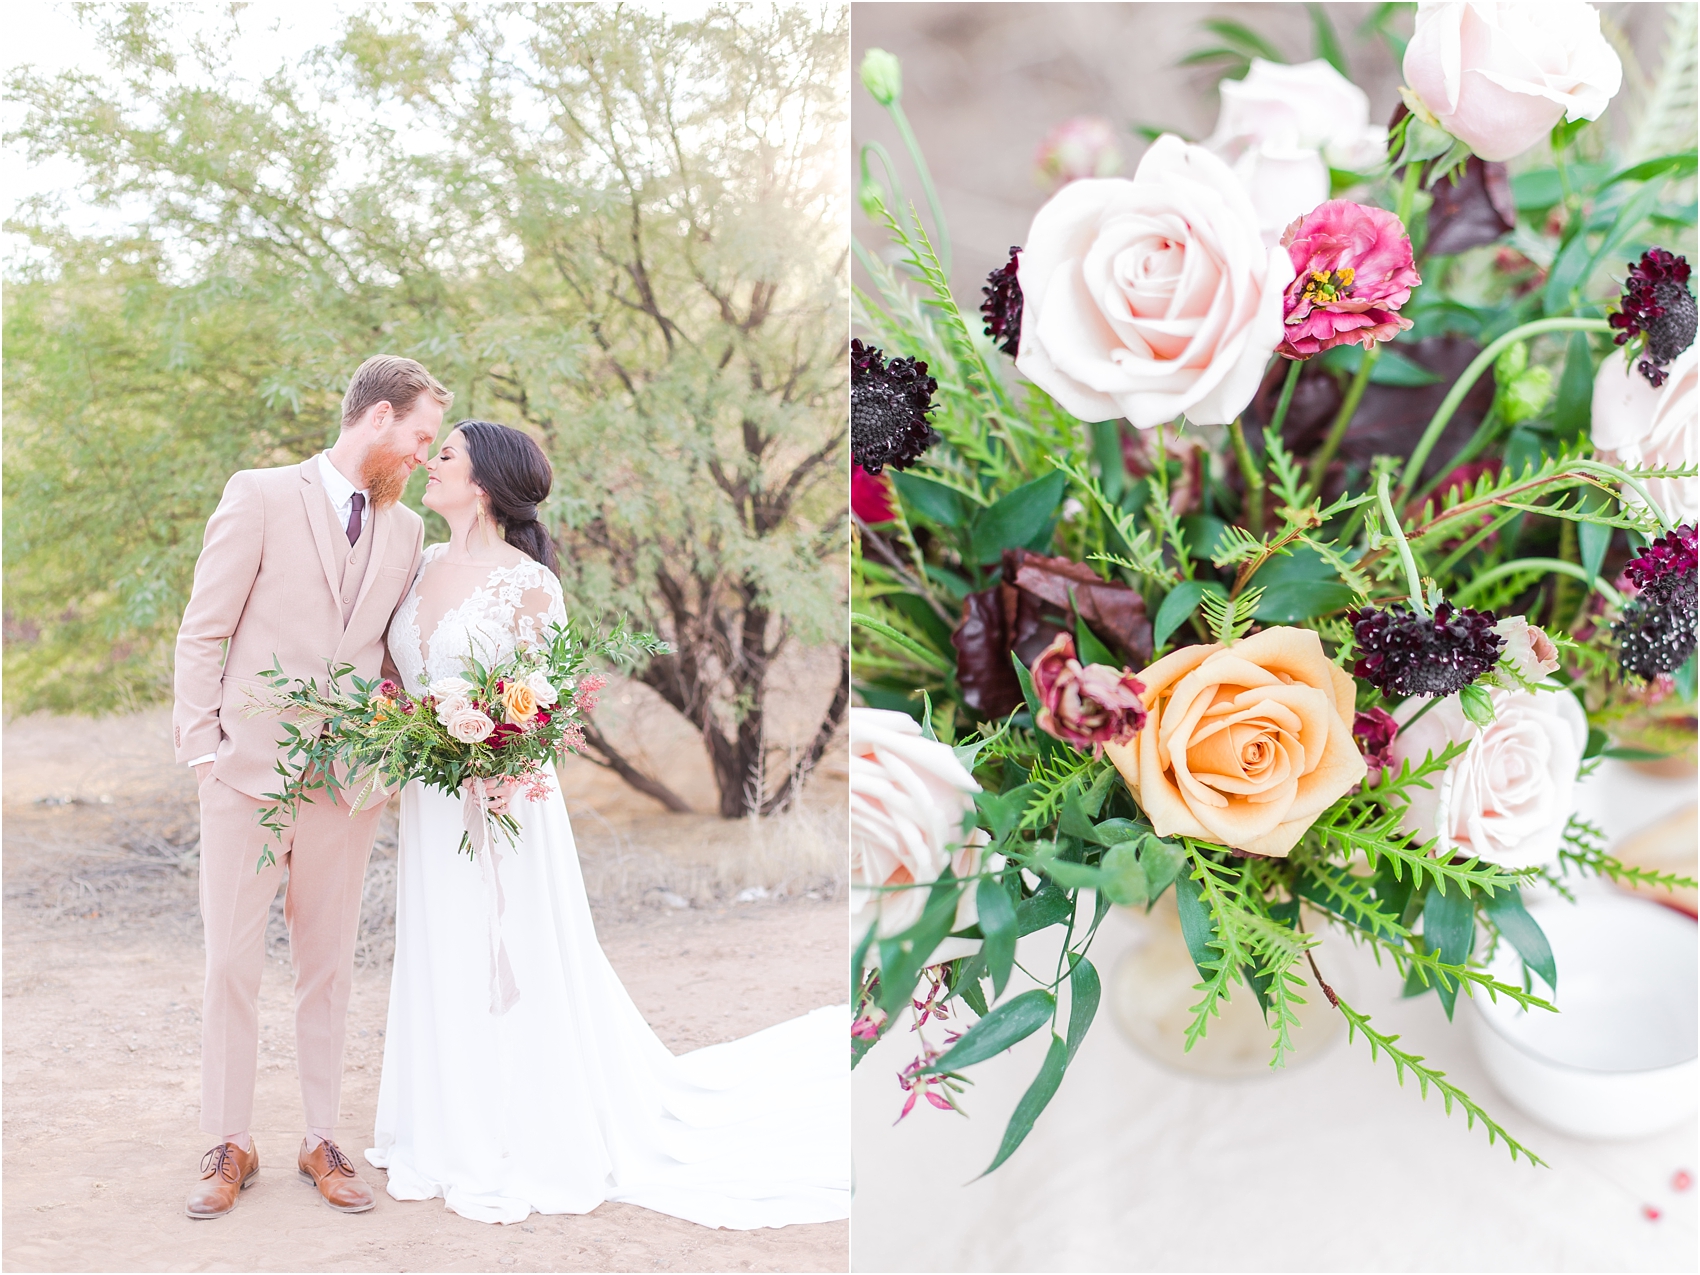 intimate-and-romantic-desert-wedding-photos-at-phoenix-marriott-tempe-at-the-buttes-in-tempe-arizona-by-courtney-carolyn-photography_0020.jpg